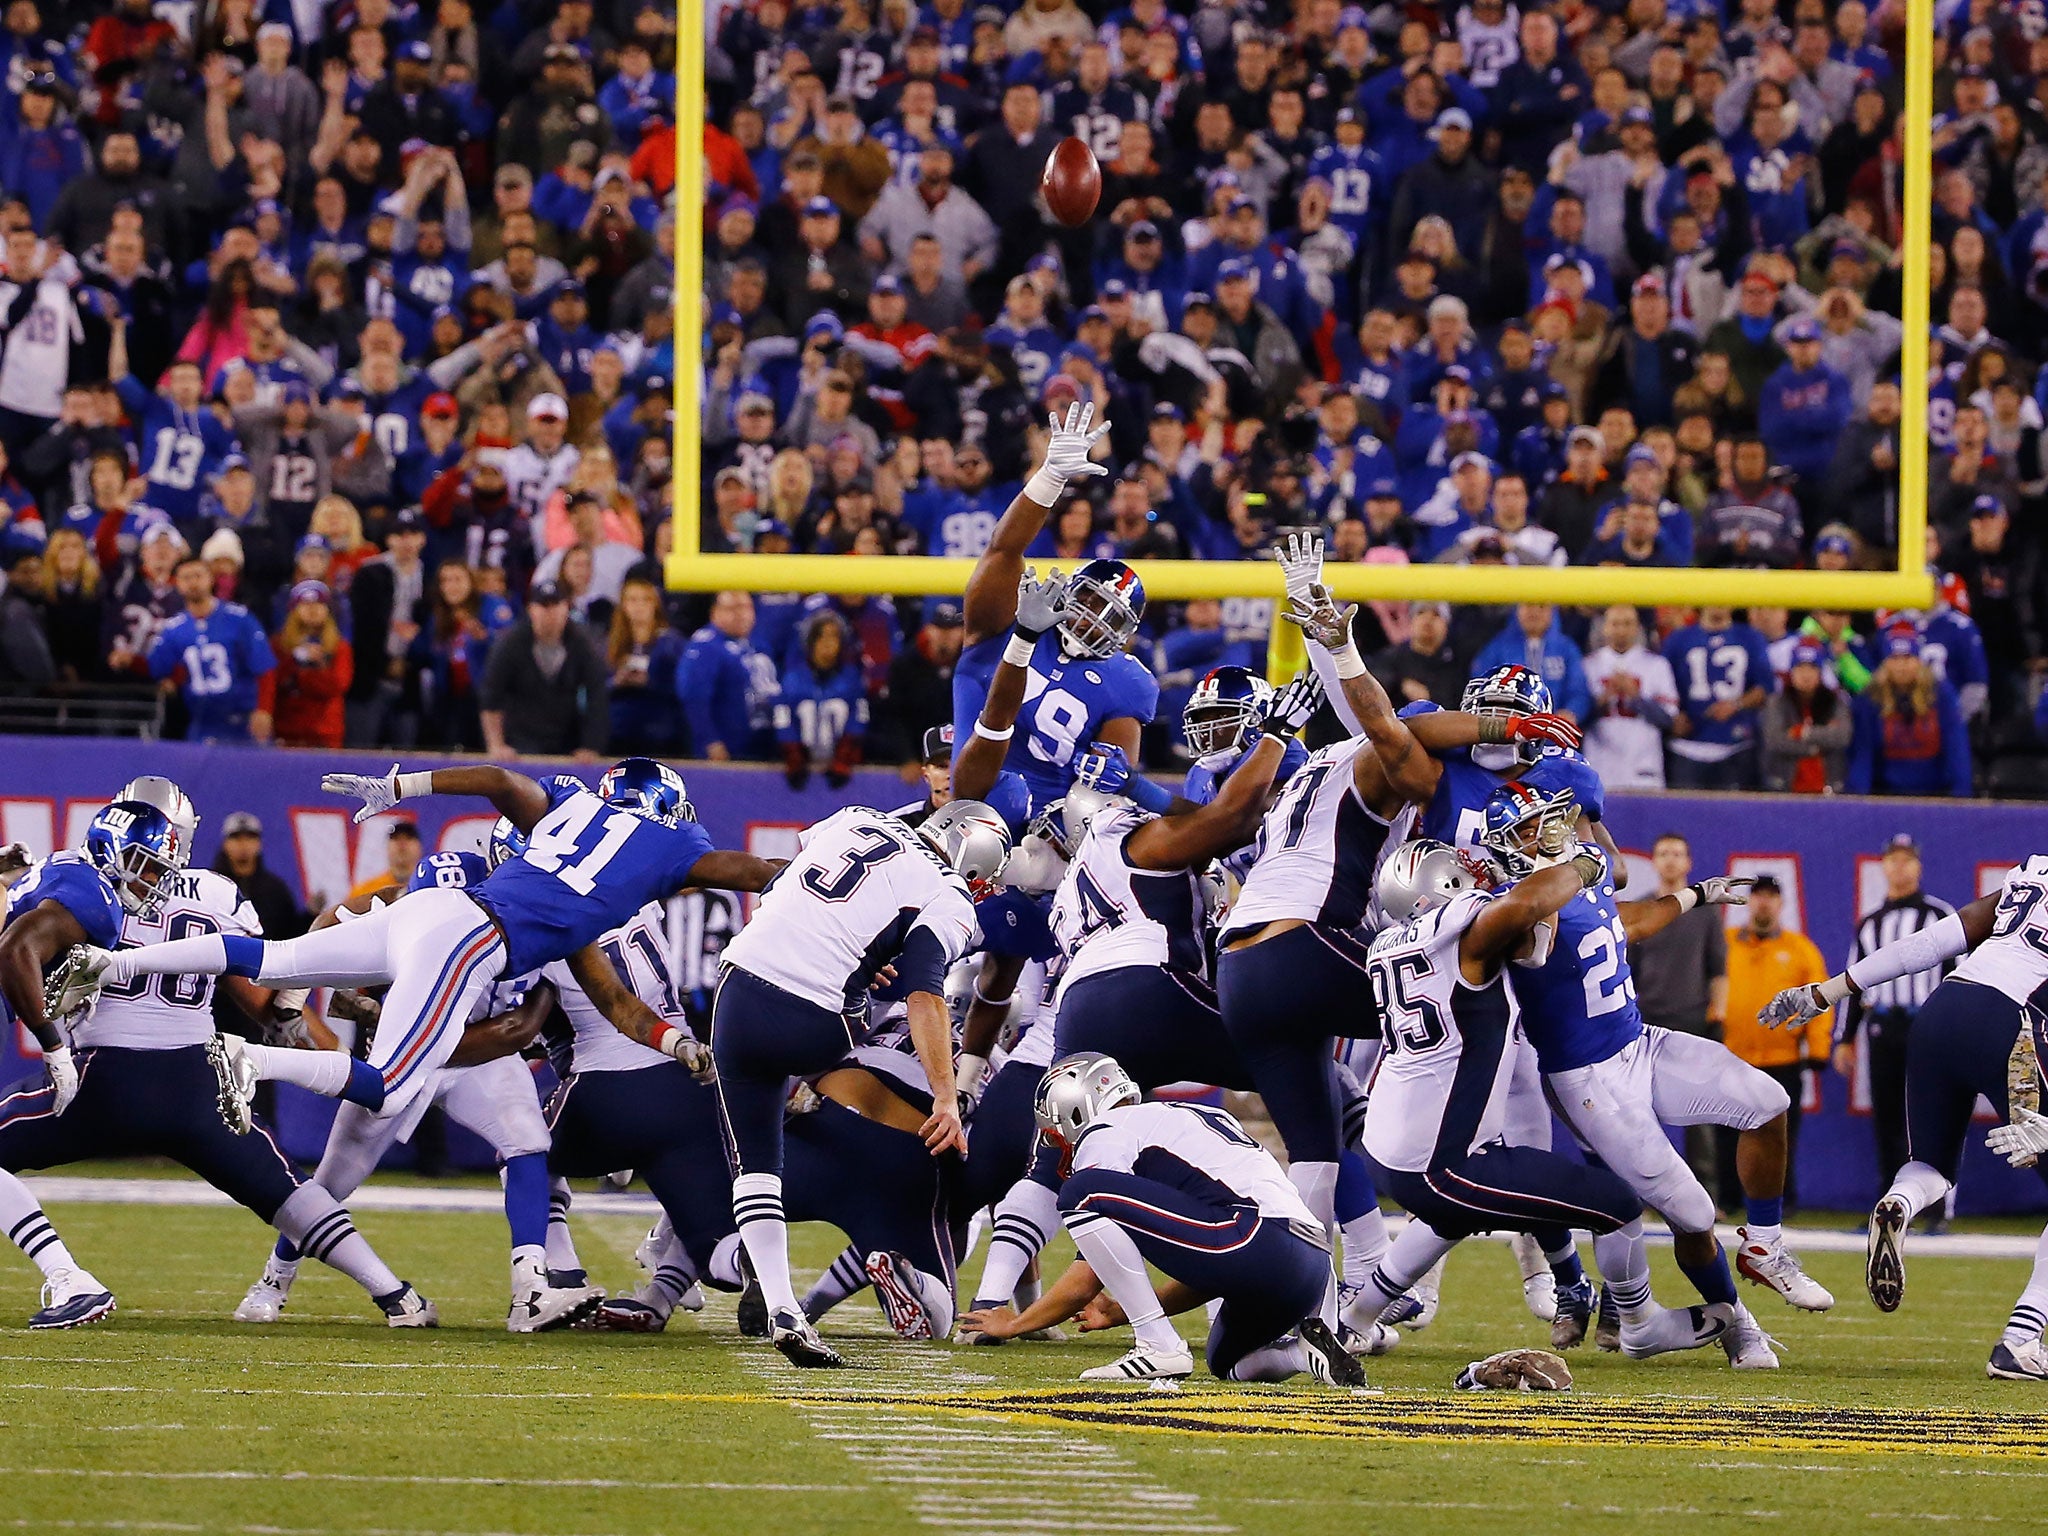 Stephen Gostkowski's field goal gave the New England Patriots victory over the New York Giants